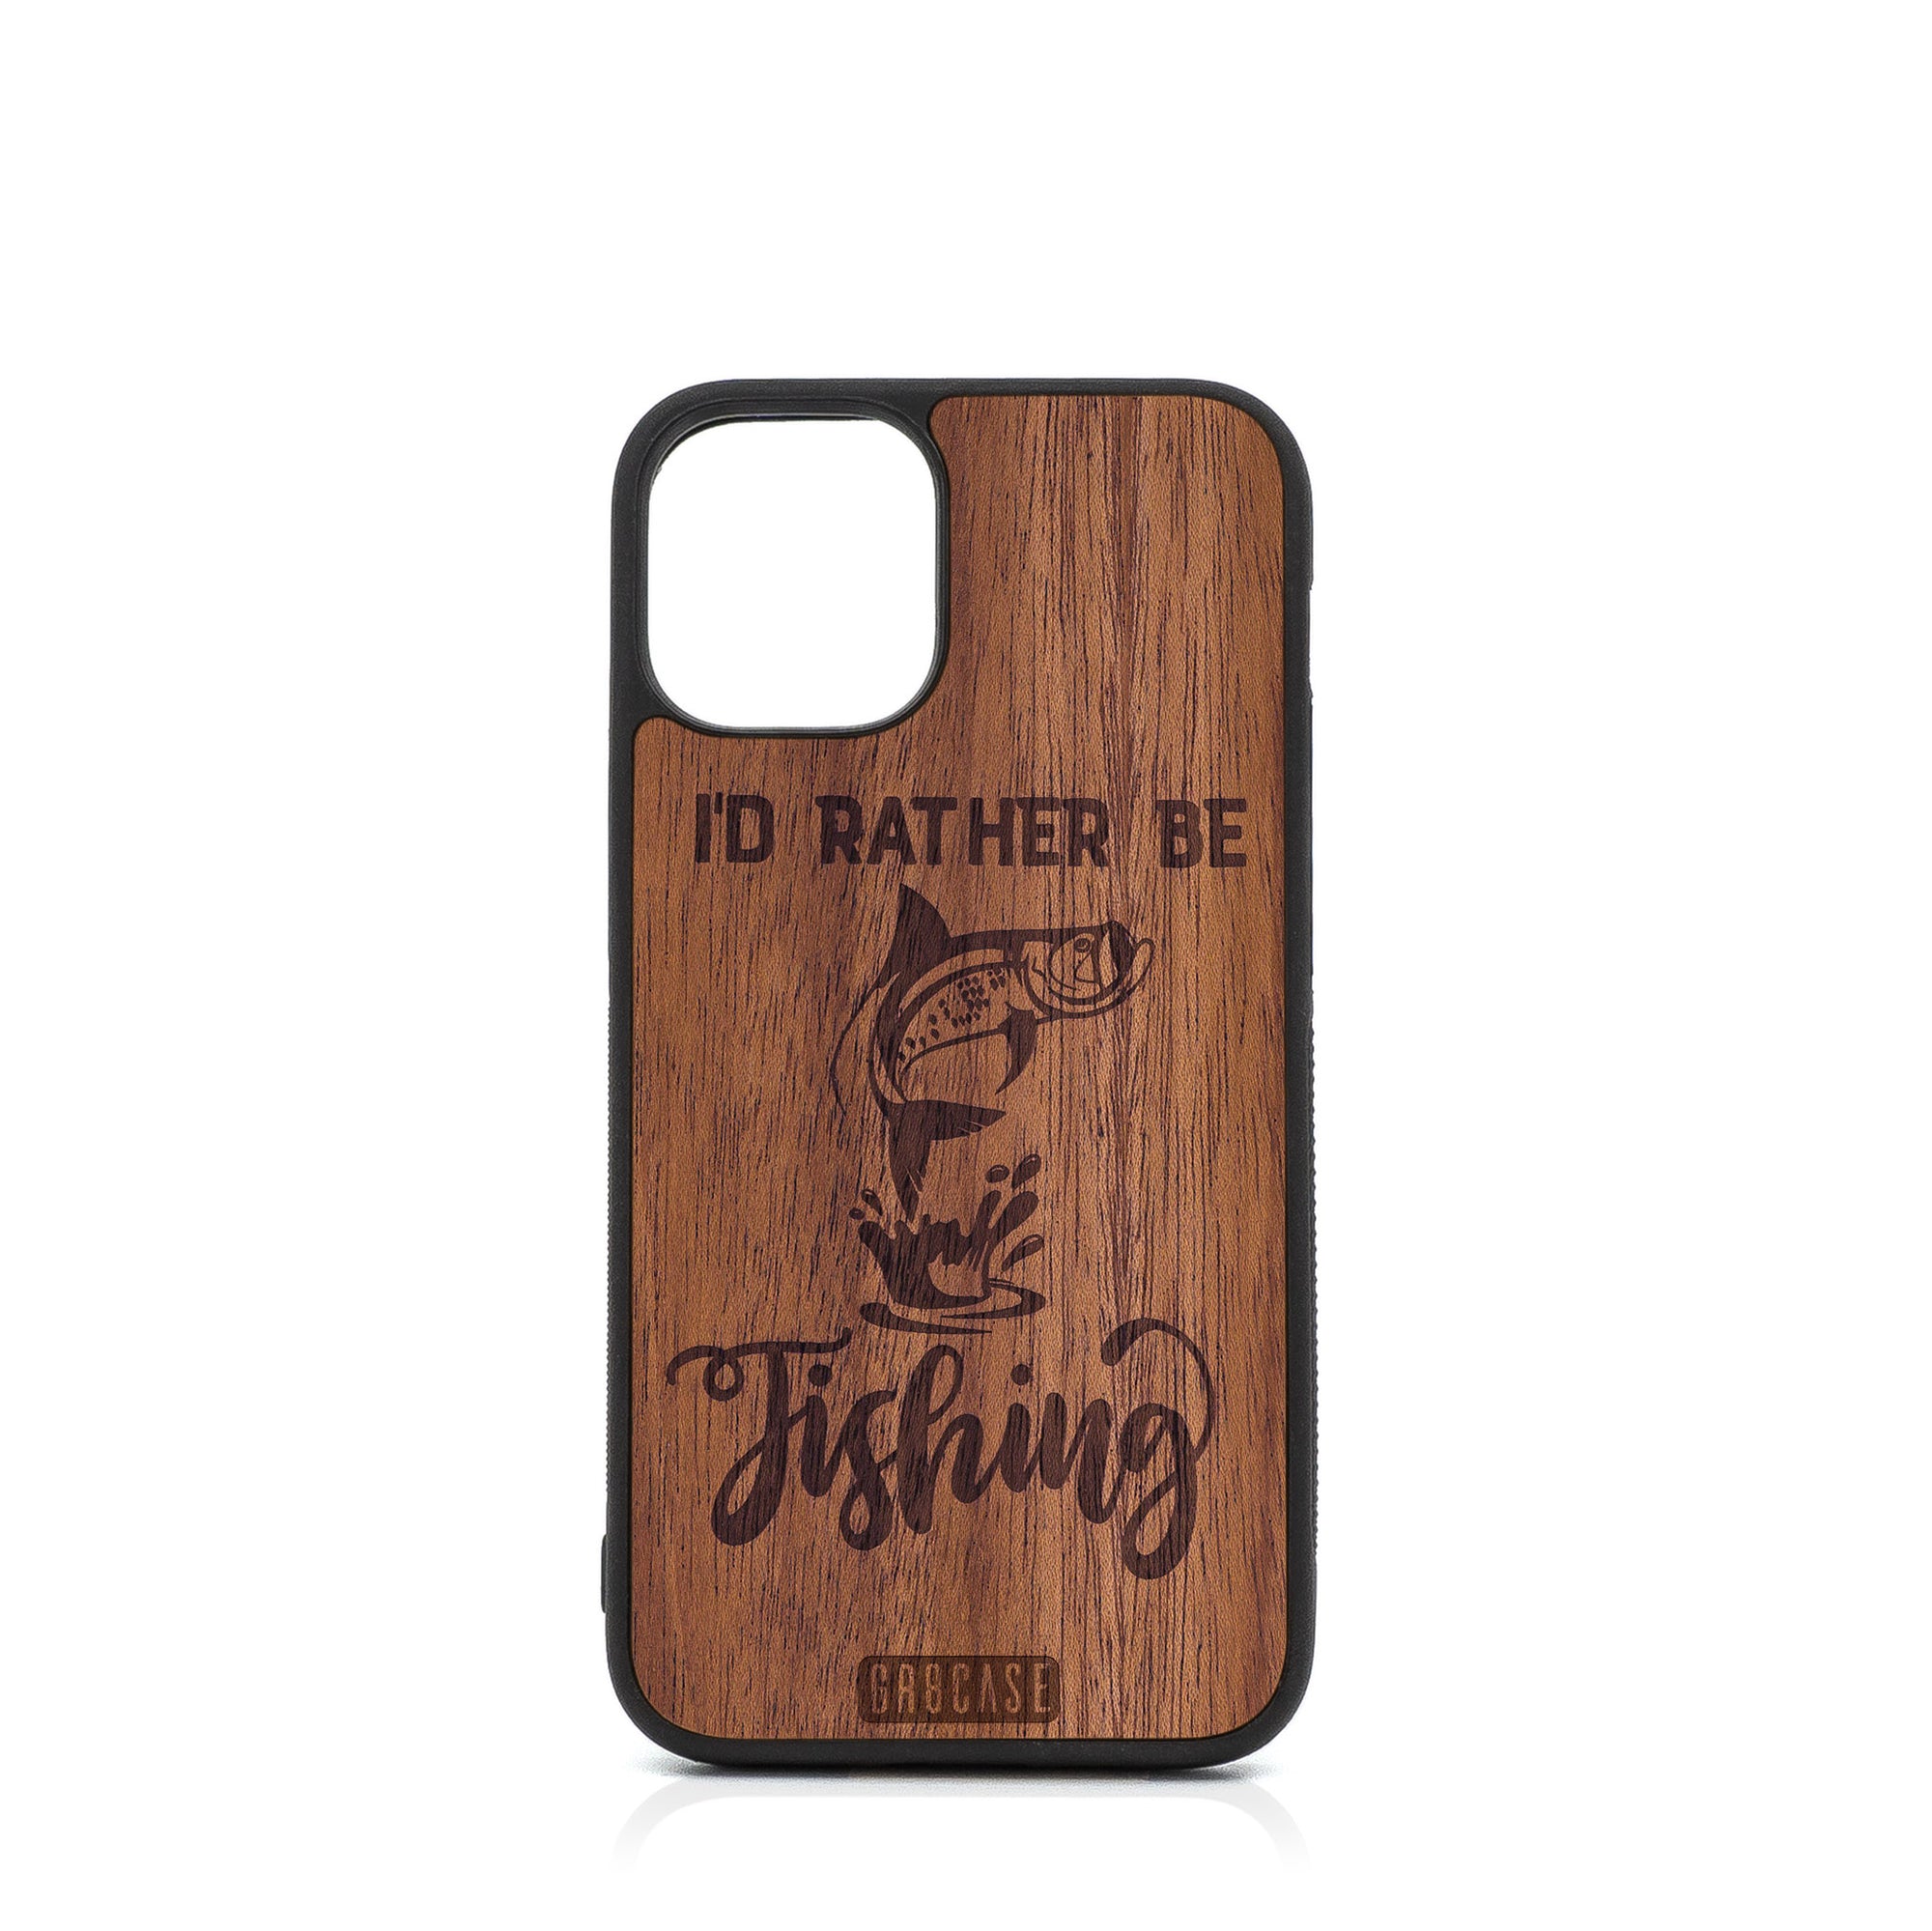 I'D Rather Be Fishing Design Wood Case For iPhone 12 Mini